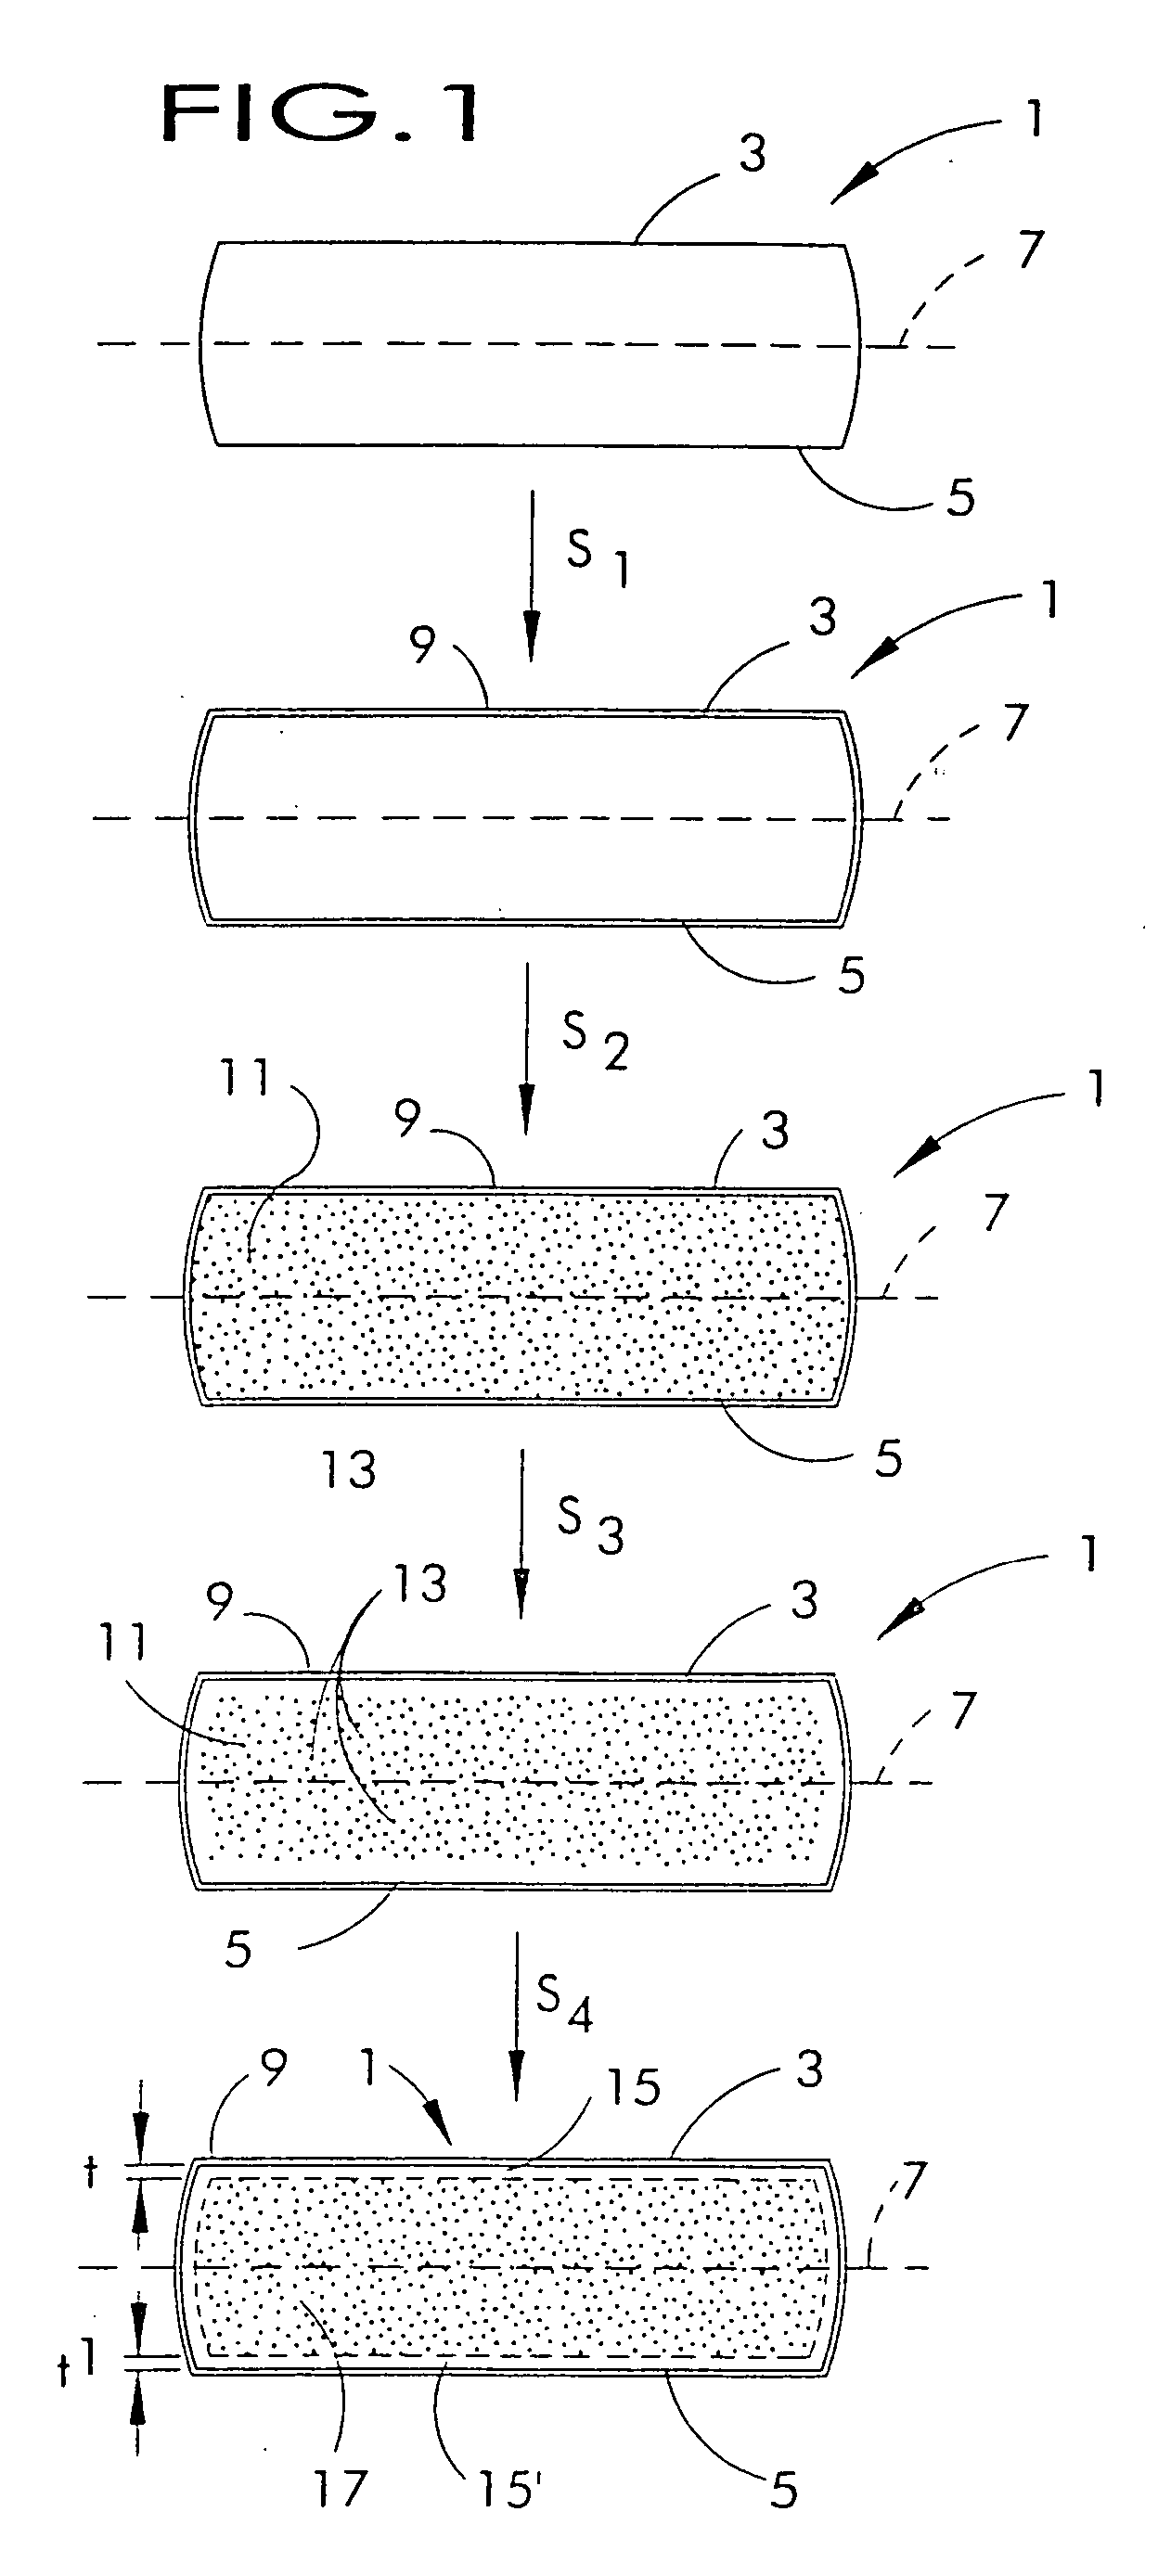 Process for implementing oxygen into a silicon wafer having a region which is free of agglomerated intrinsic point defects